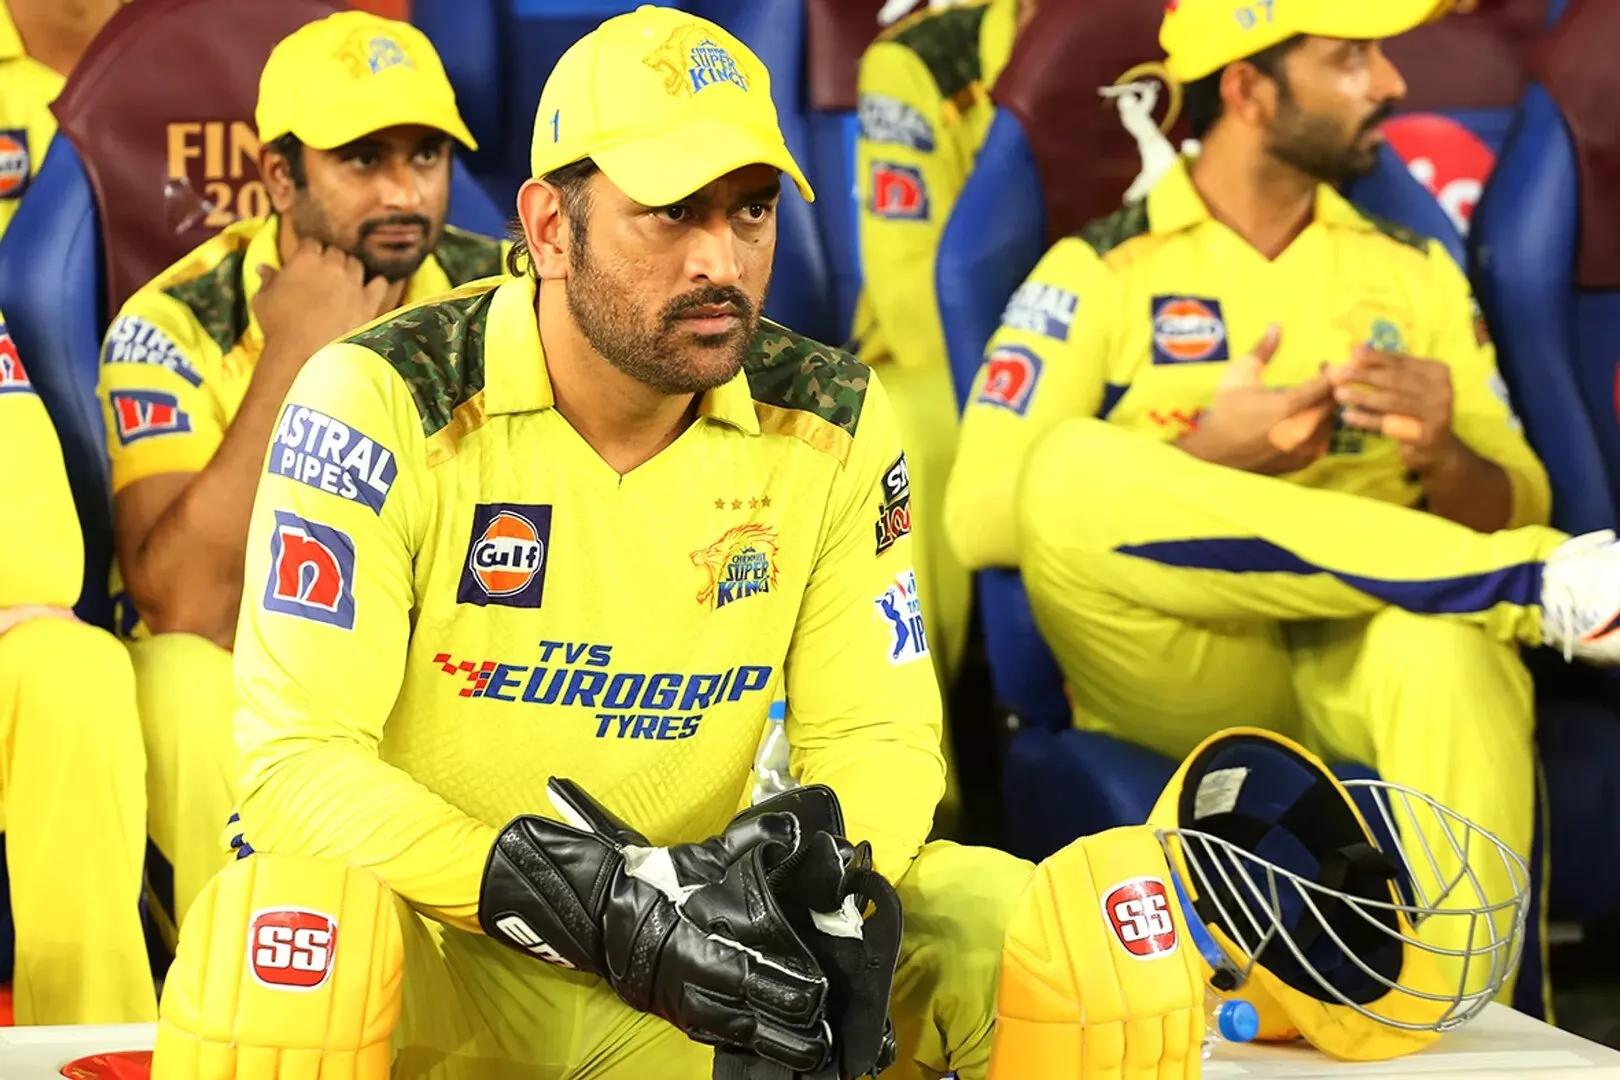 MS Dhoni's Inspirational Words Ignite Celebration in CSK Dressing Room After IPL Victory